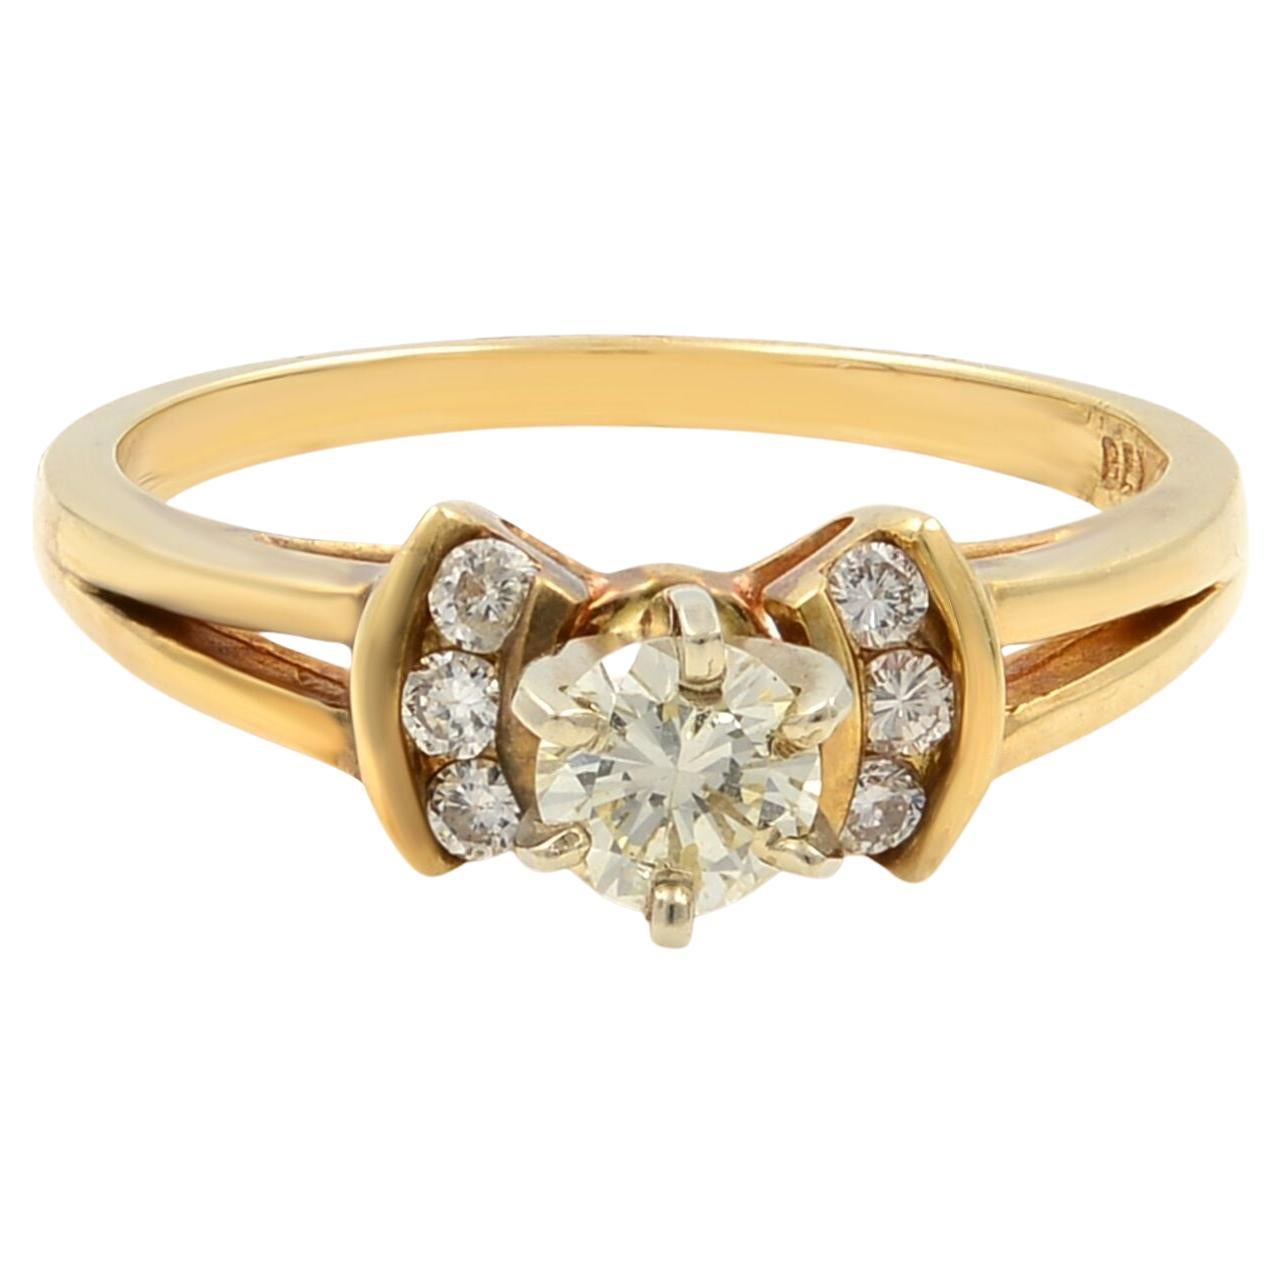 Round Cut Diamond Accented Engagement Ring 14K Yellow Gold 0.45Cttw